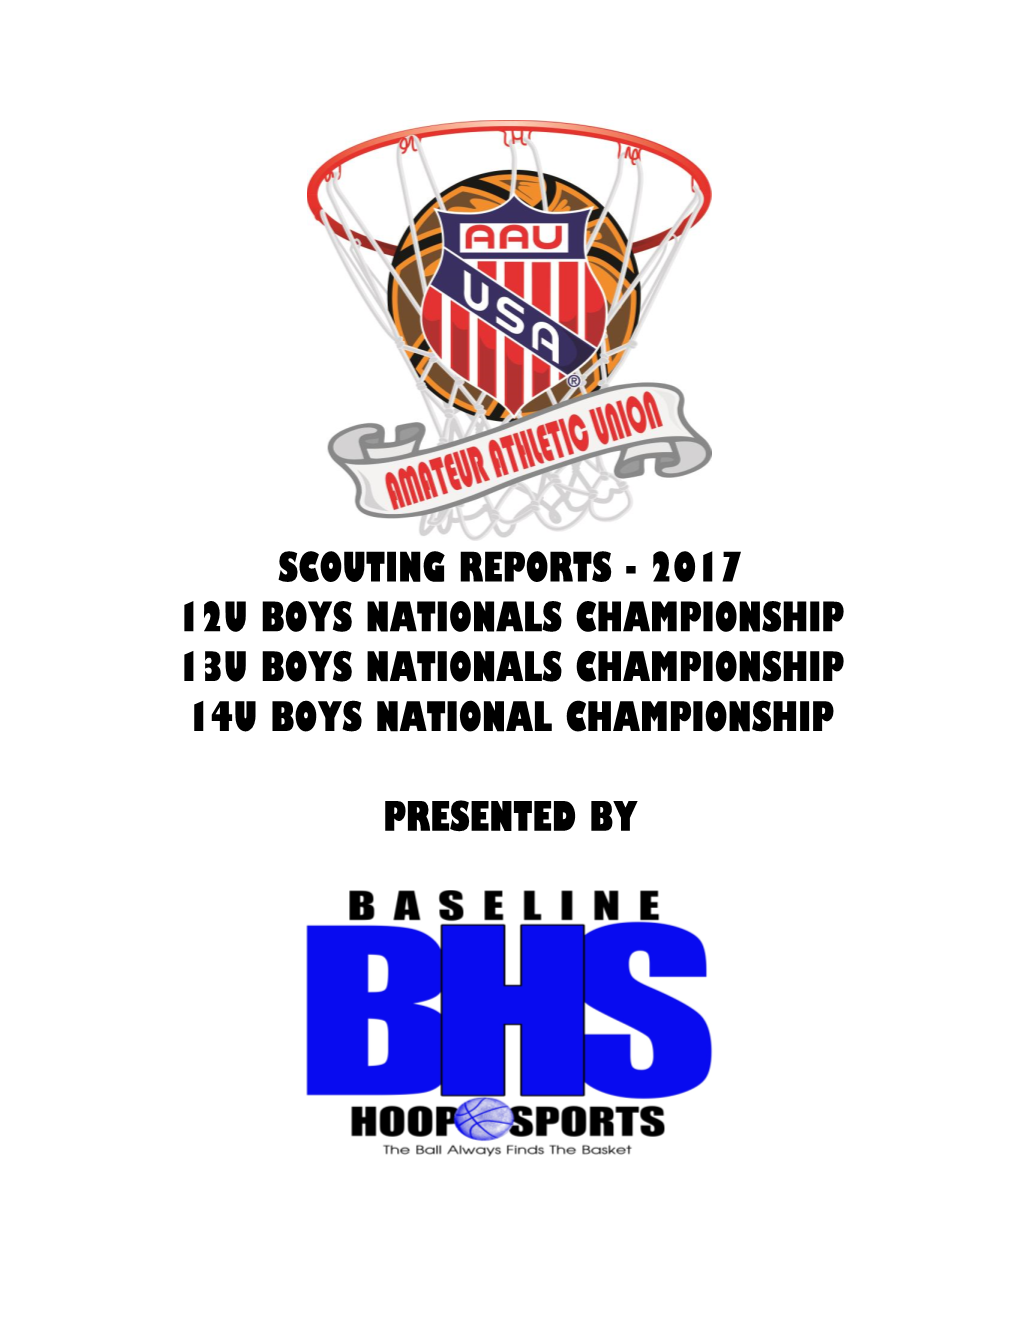 Scouting Reports - 2017 12U Boys Nationals Championship 13U Boys Nationals Championship 14U Boys National Championship